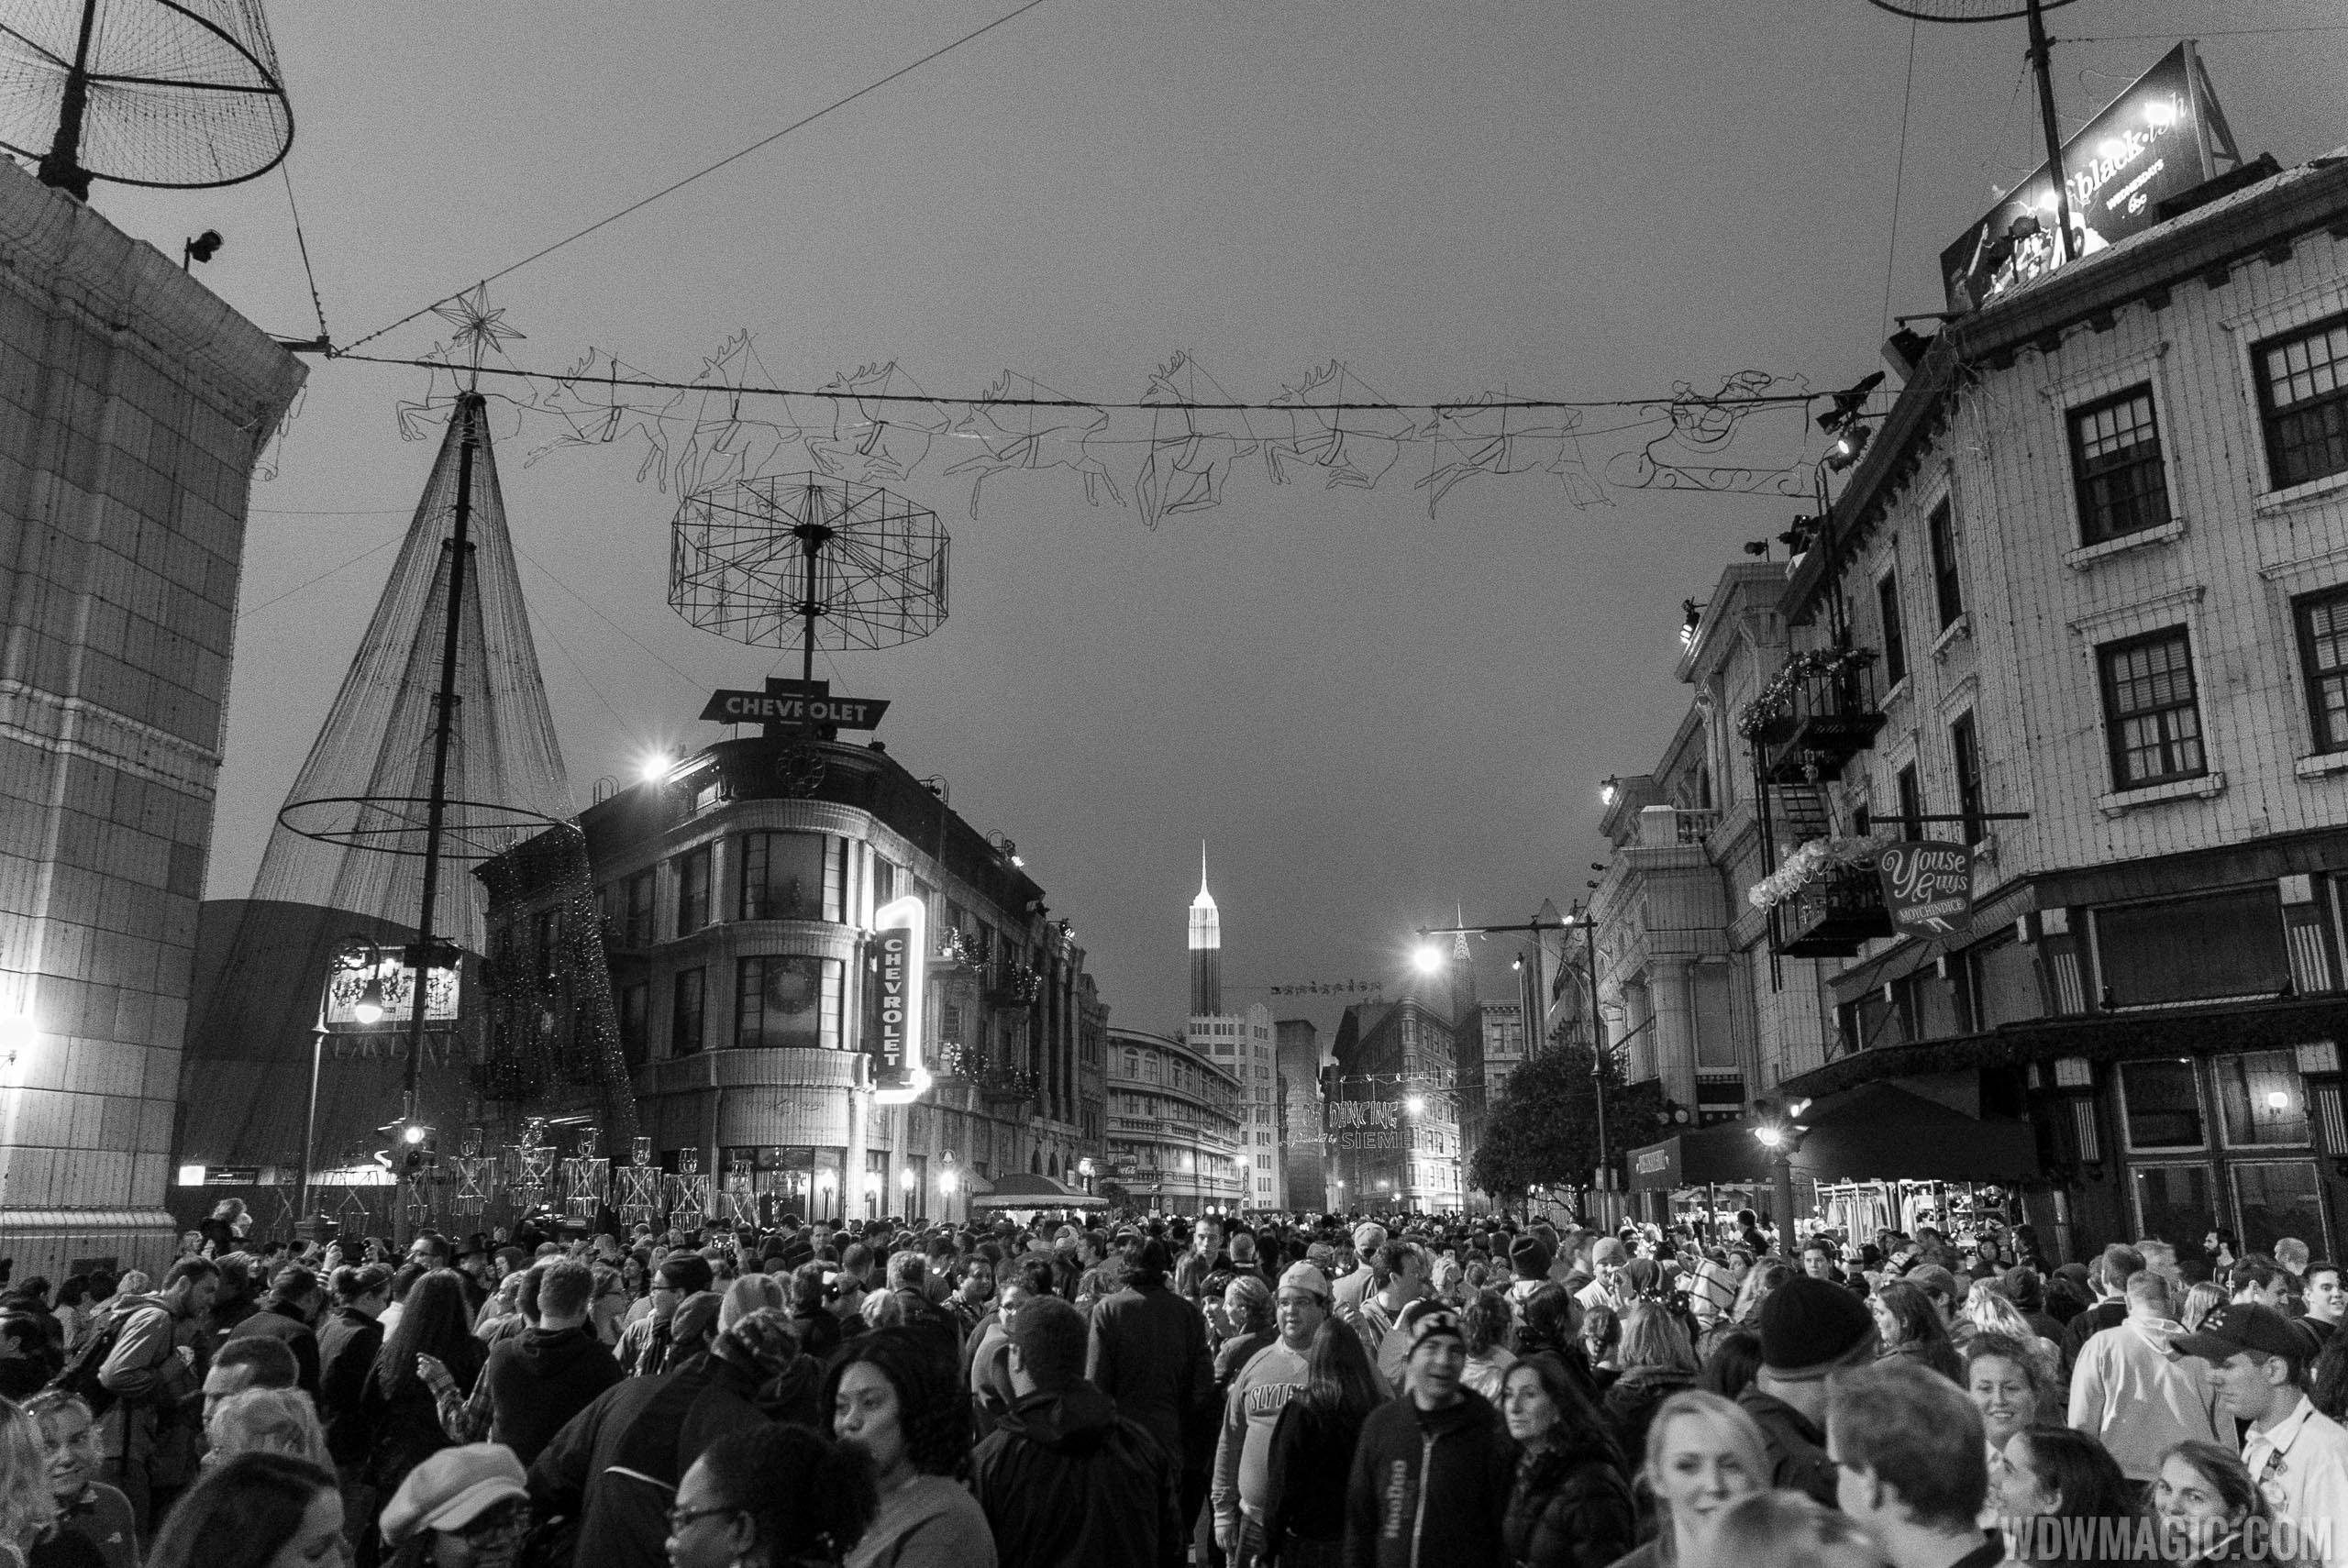 Crowds after the lights turn off for the final time